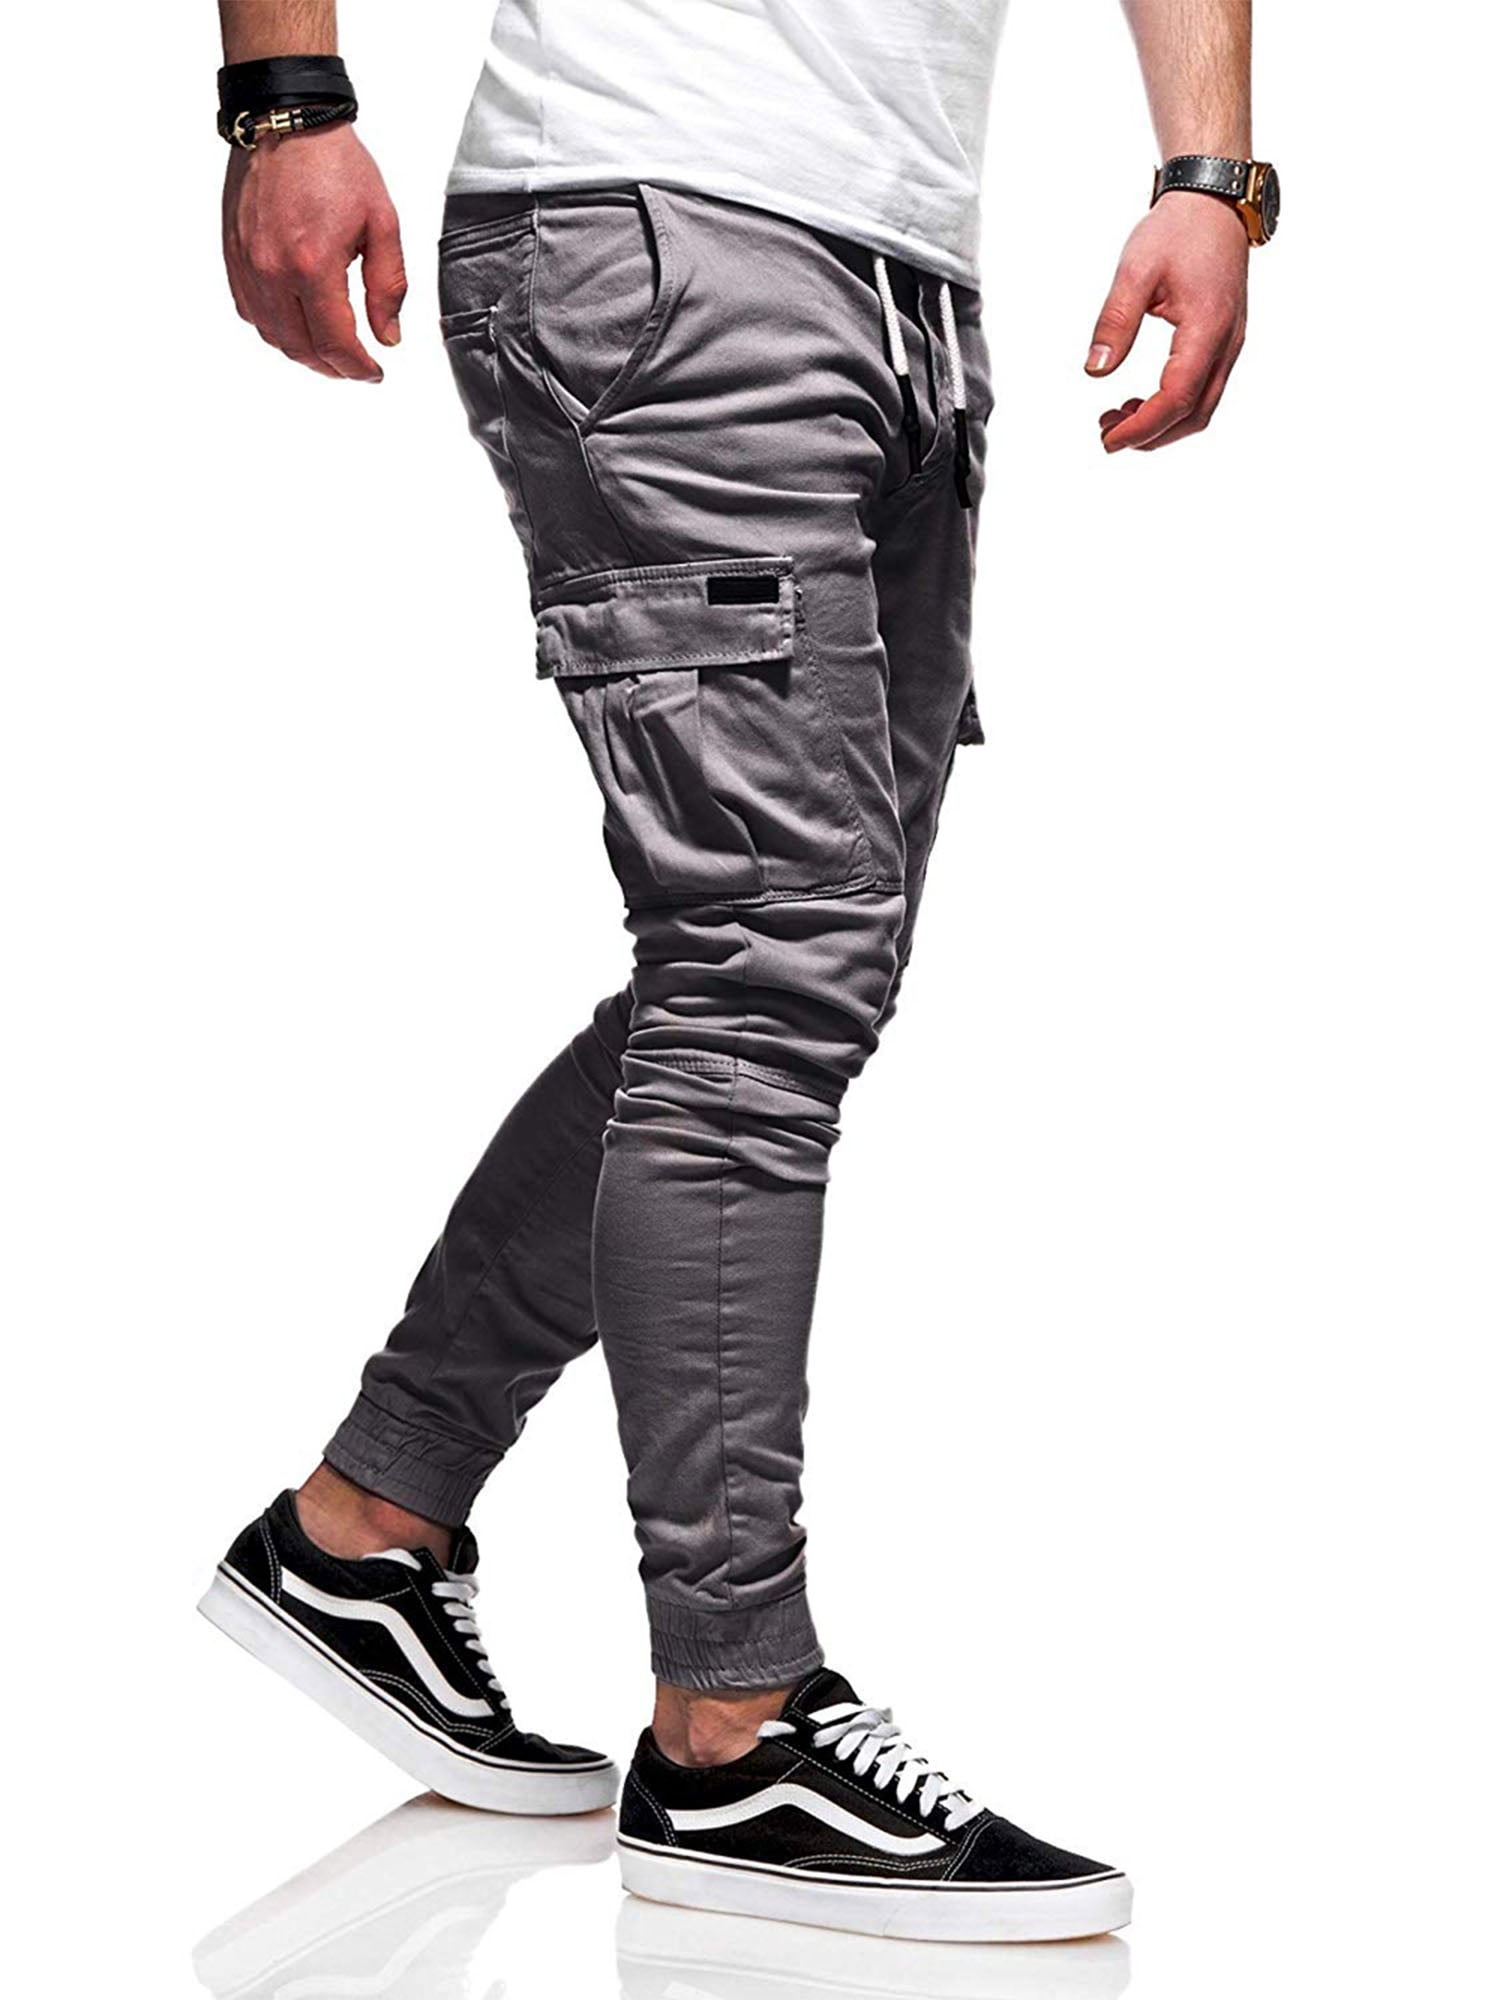 Buy Vancouver 6 Pocket Stylish Regular Fit Cotton Cargo Jogger Pants for Men  with Elasticated Stretchable Design for Casual and Sporty Looks  (Size-XL,Color-Black) at Amazon.in